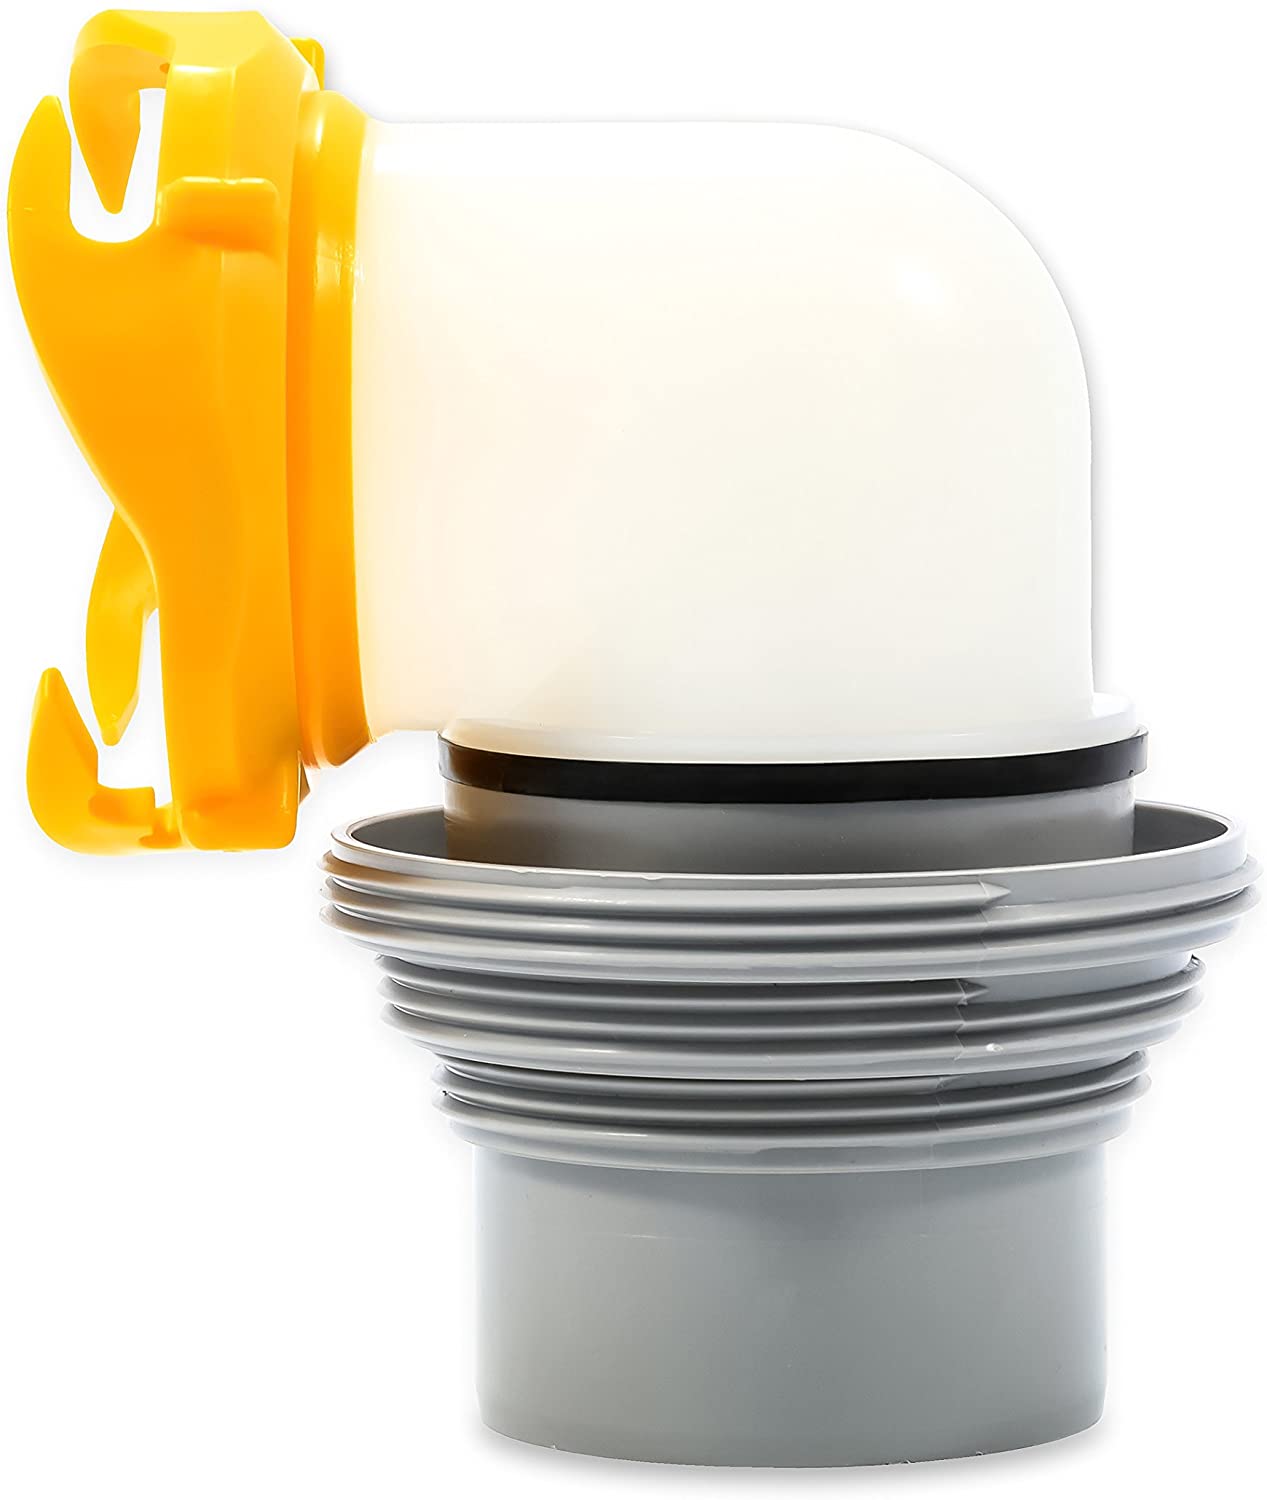 The Camco Revolution 4-in-1 Sewer Adapter with Elbow takes the trouble out of connecting to dump stations. It features a built-in gasket for an odortight connection. Its translucent elbow detaches from the 4-in-1 adapter to fit into a 4 inch RV bumper.